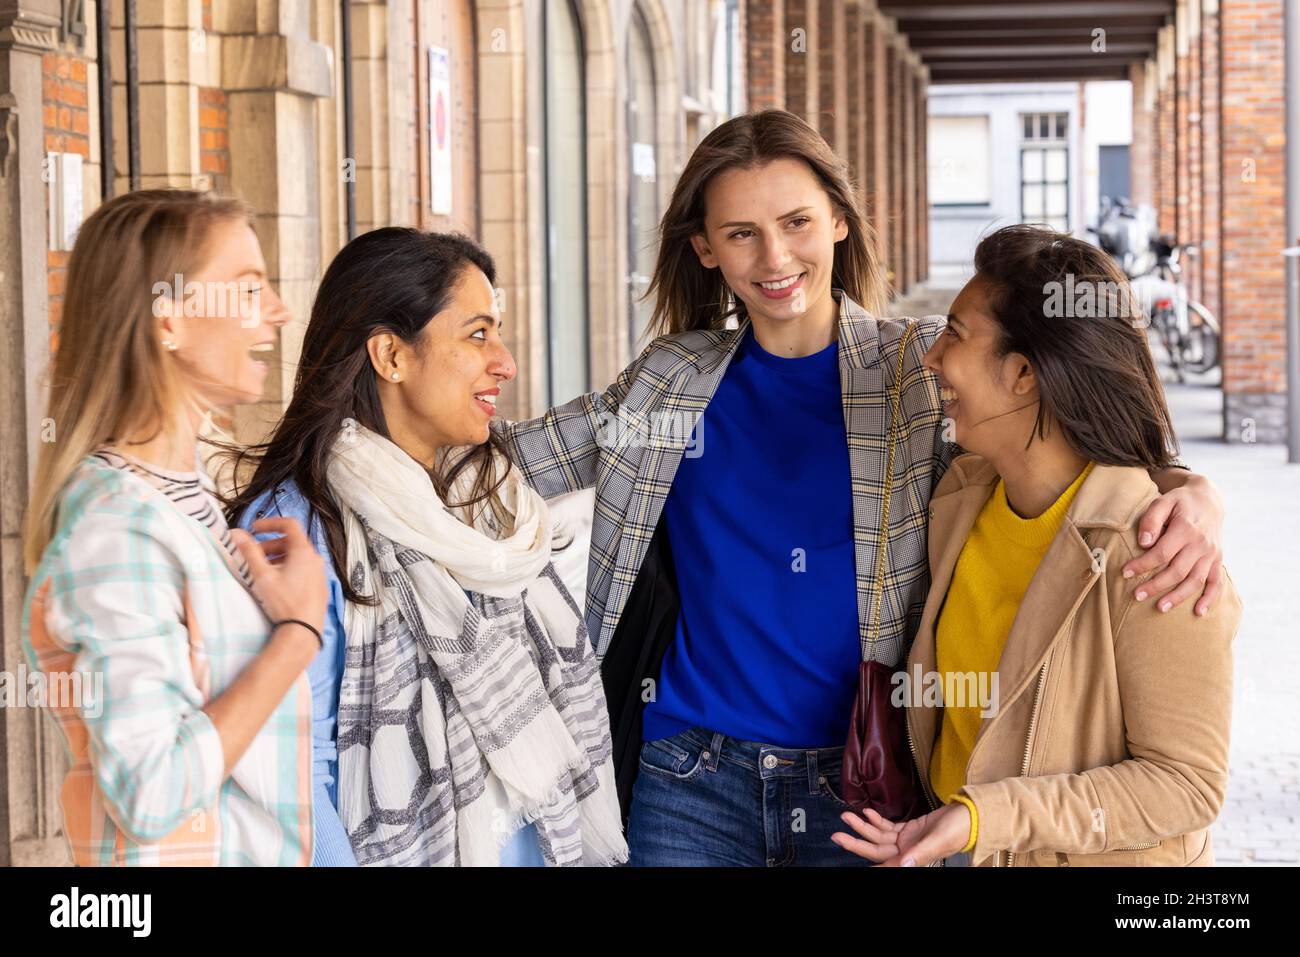 Lifestyle portrait of a diverse multiethnic group of attractive young woman friends talking together and smiling, having fun out Stock Photo